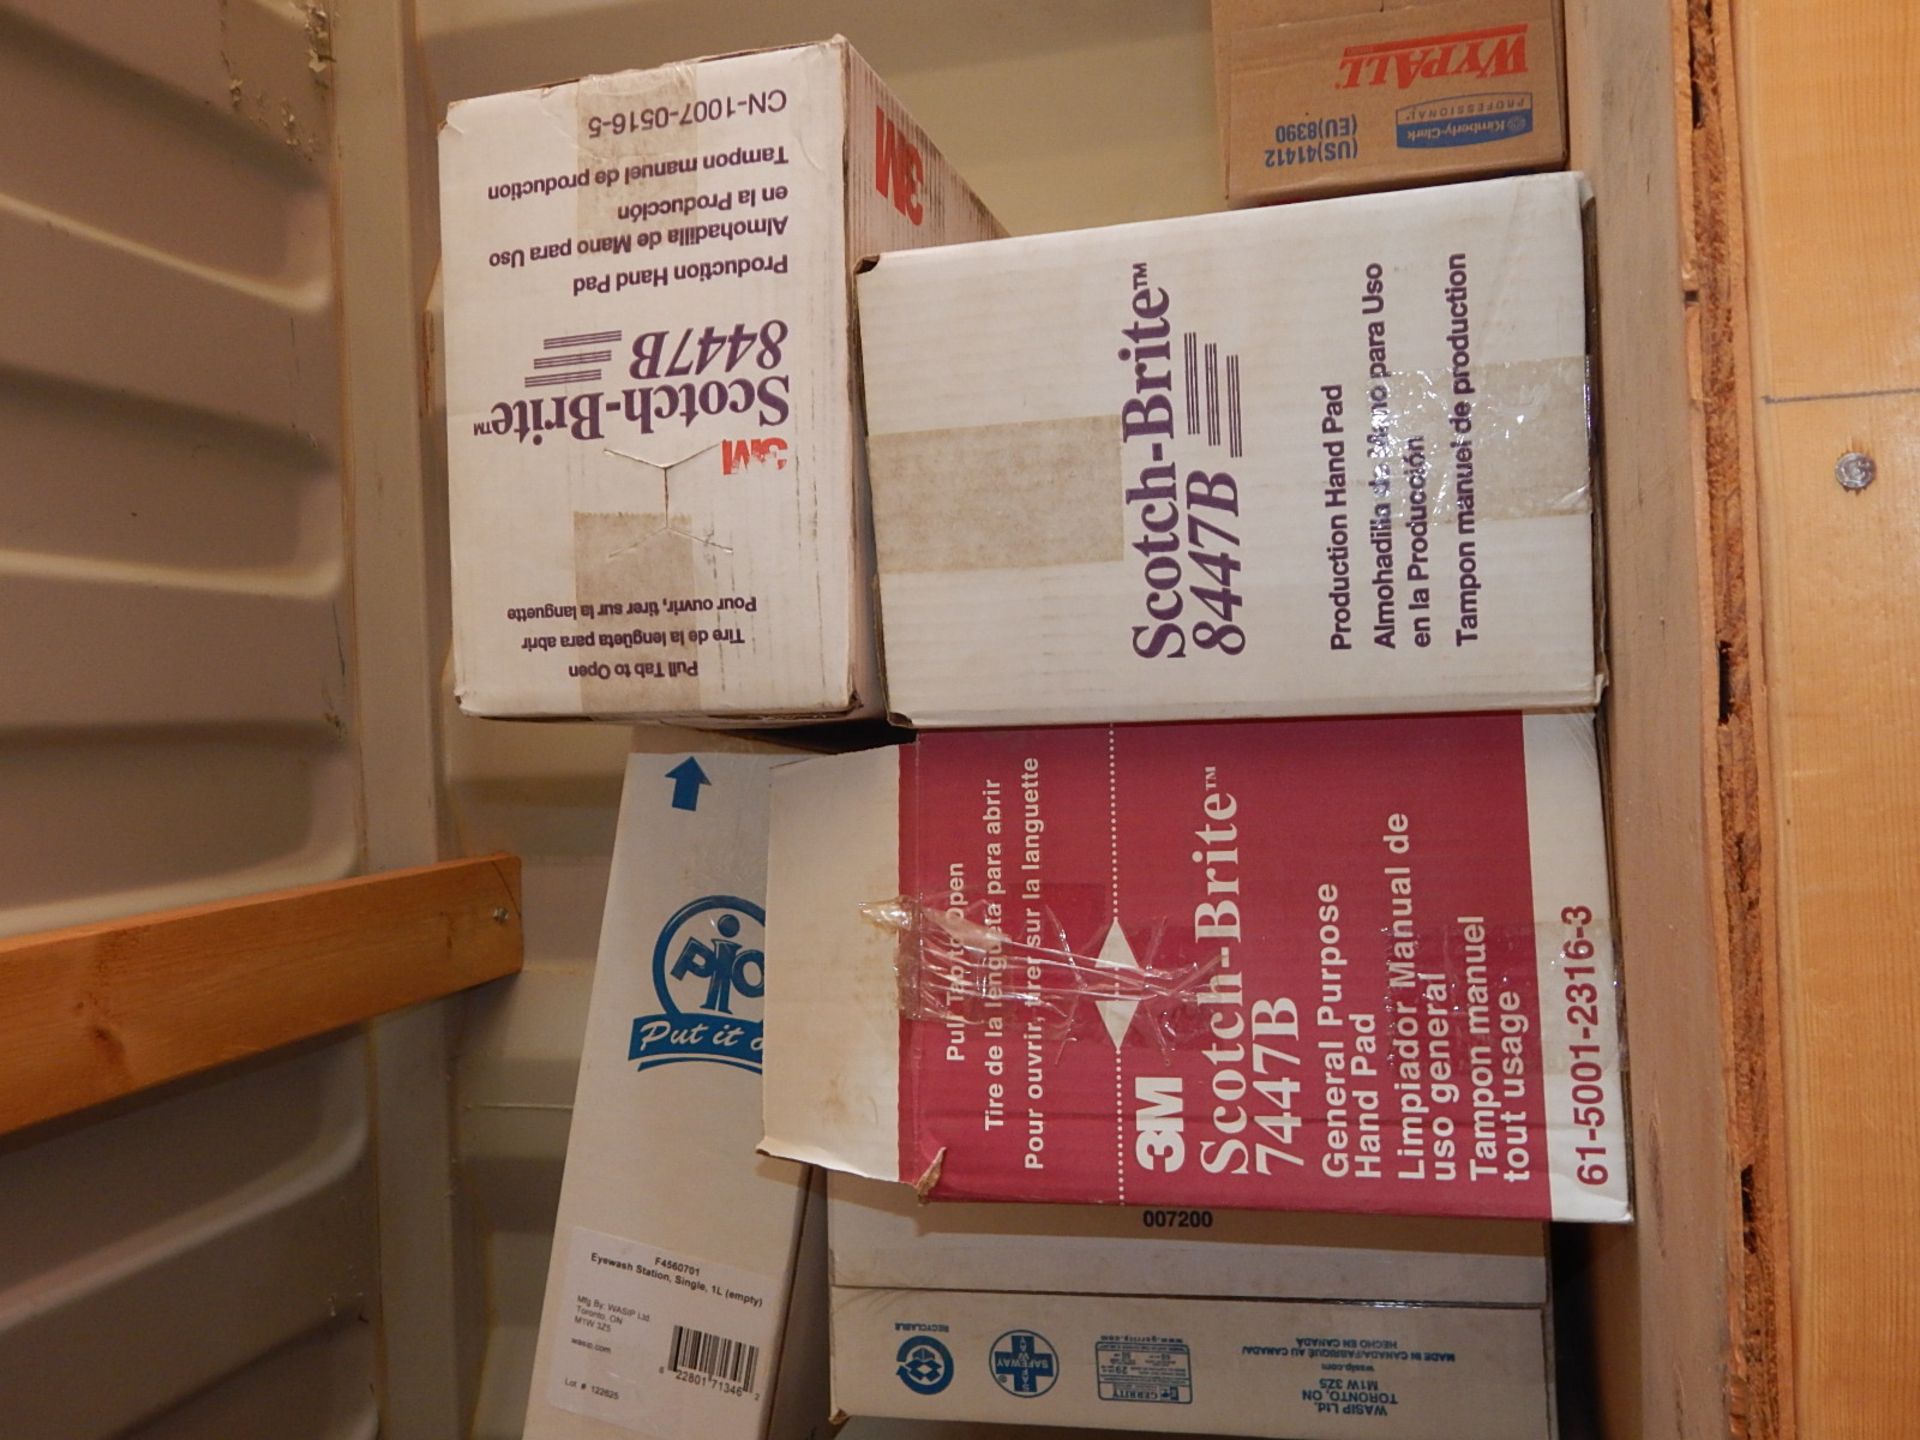 LOT/ CONTENTS OF SHELF CONSISTING OF SHRINK WRAP, SCRUBBING PADS, AND WIRE FLAGS (SC 235) - Image 2 of 3